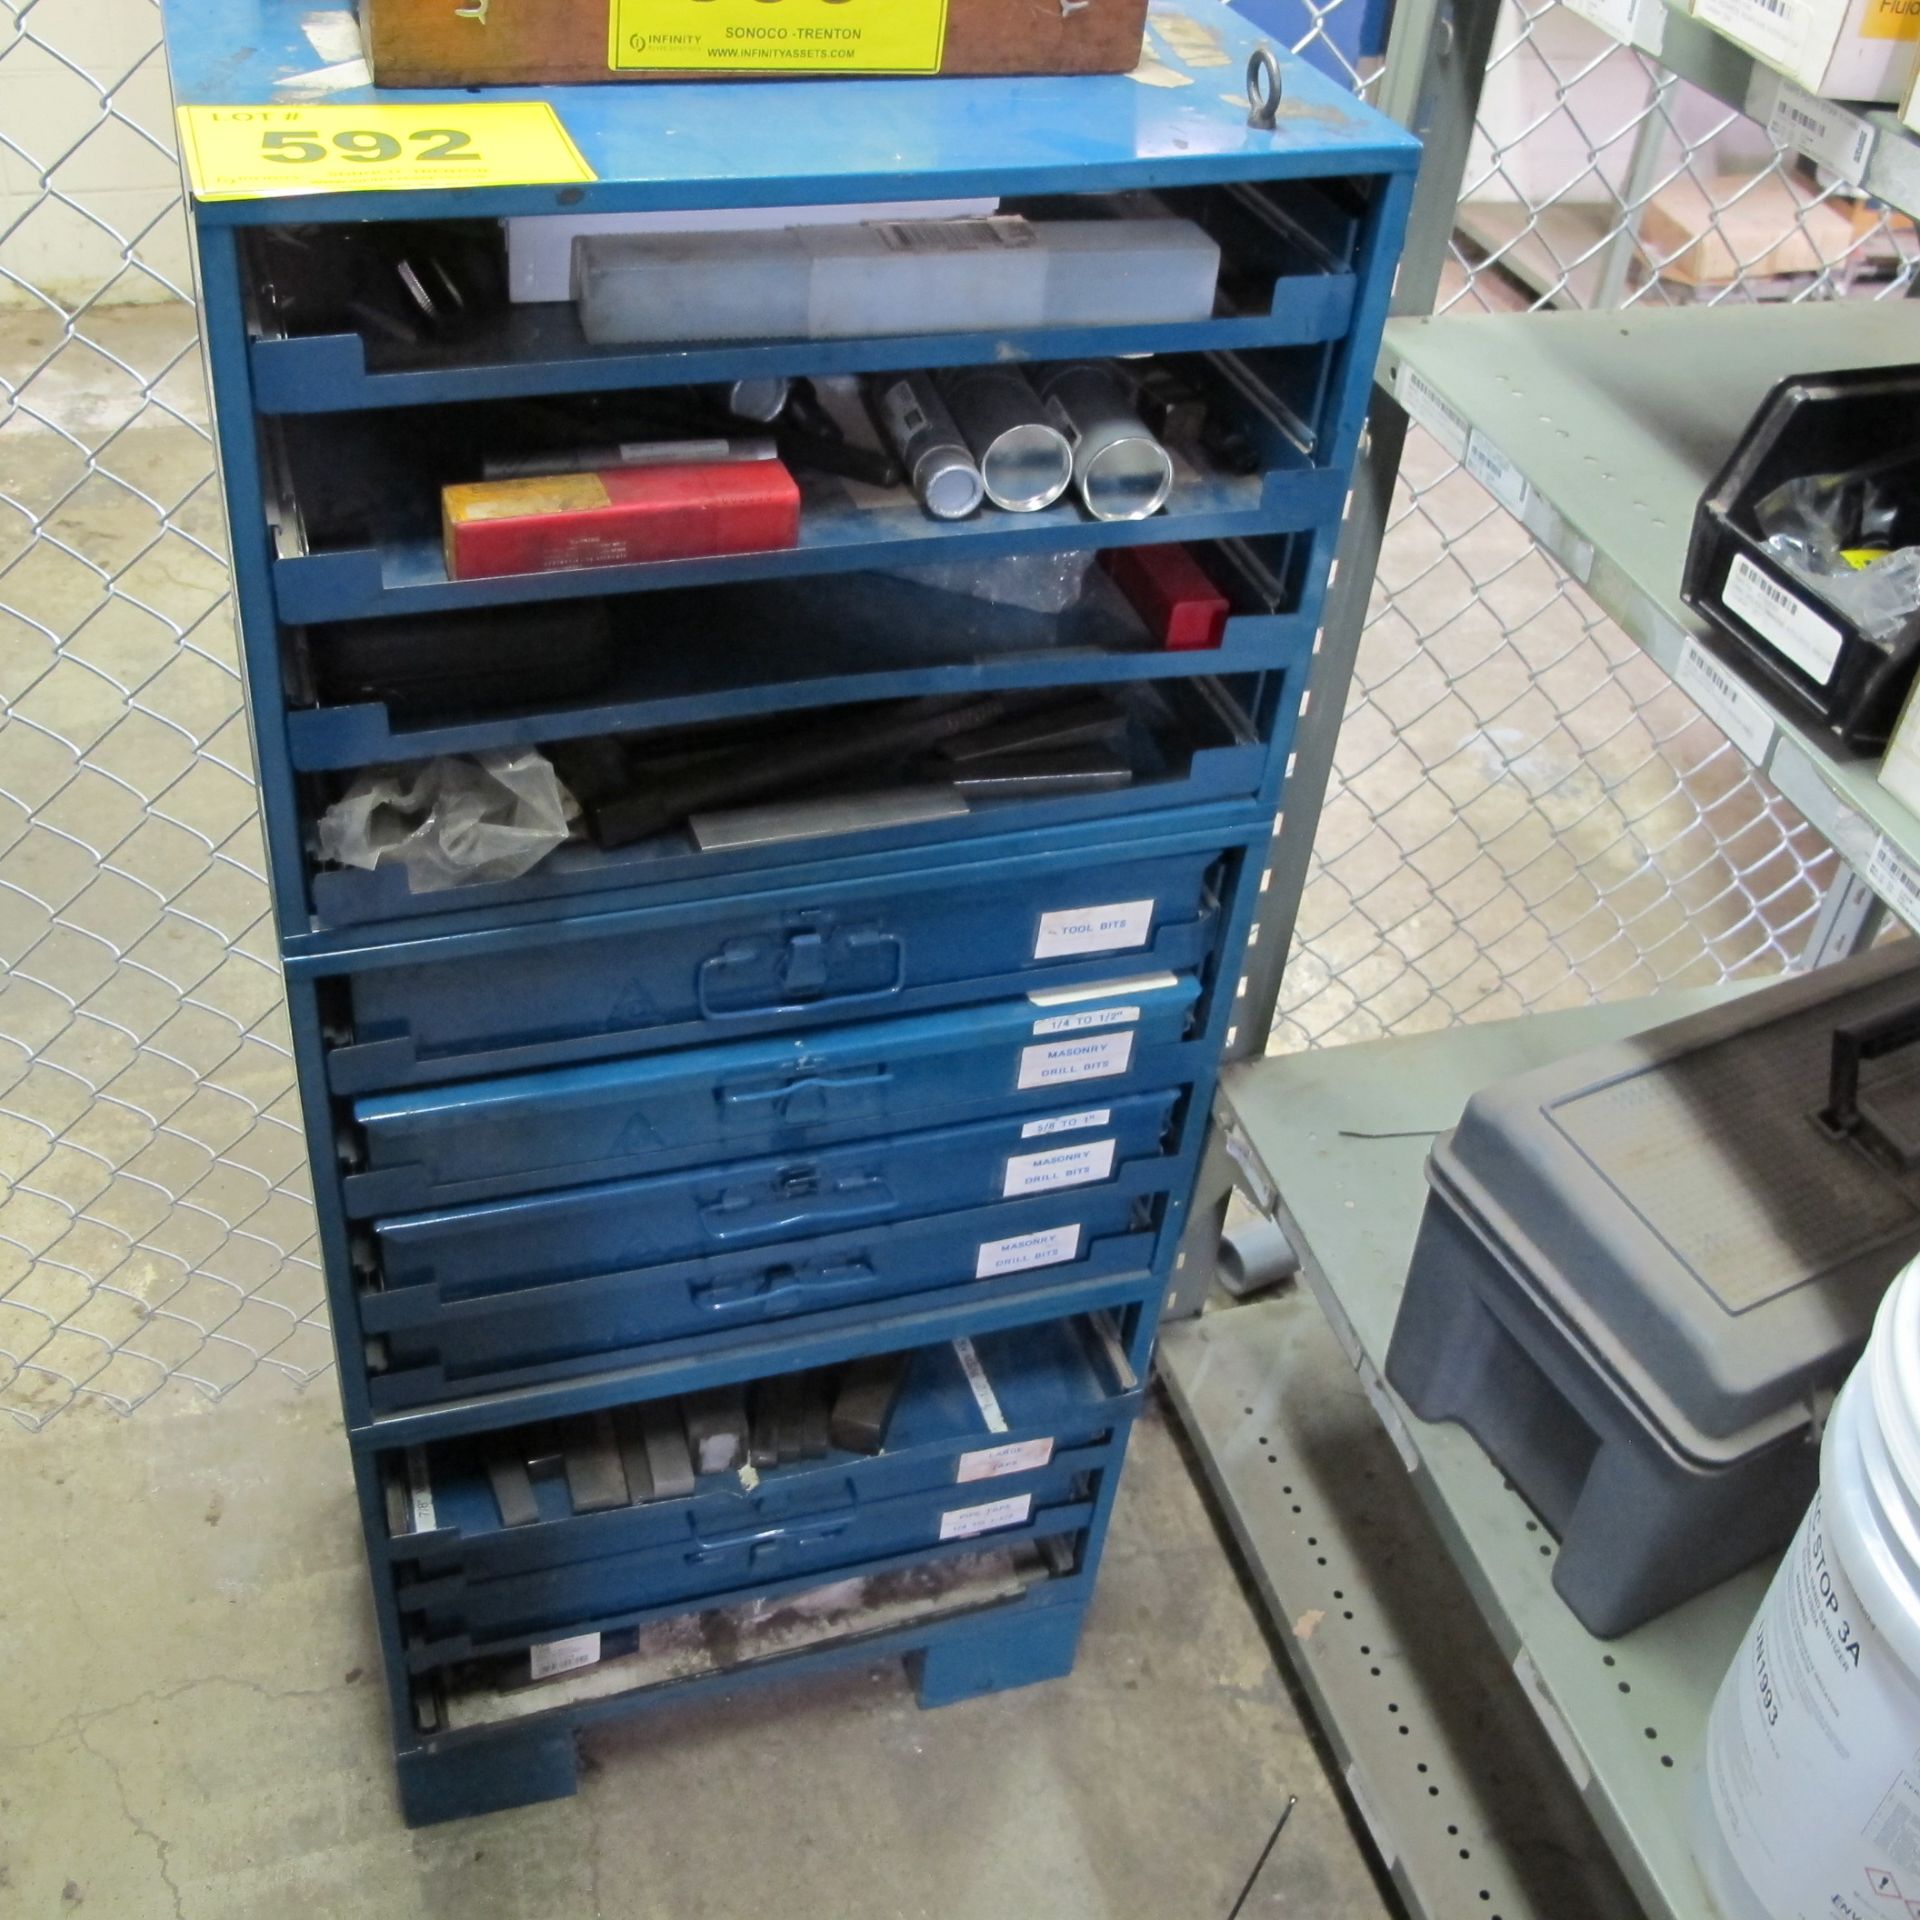 12-LEVEL CABINET CONTAINING CARBIDE CUTTING SETS, TAPS, DRILLS, KEYSTOCK ETC. (WEST BUILDING,